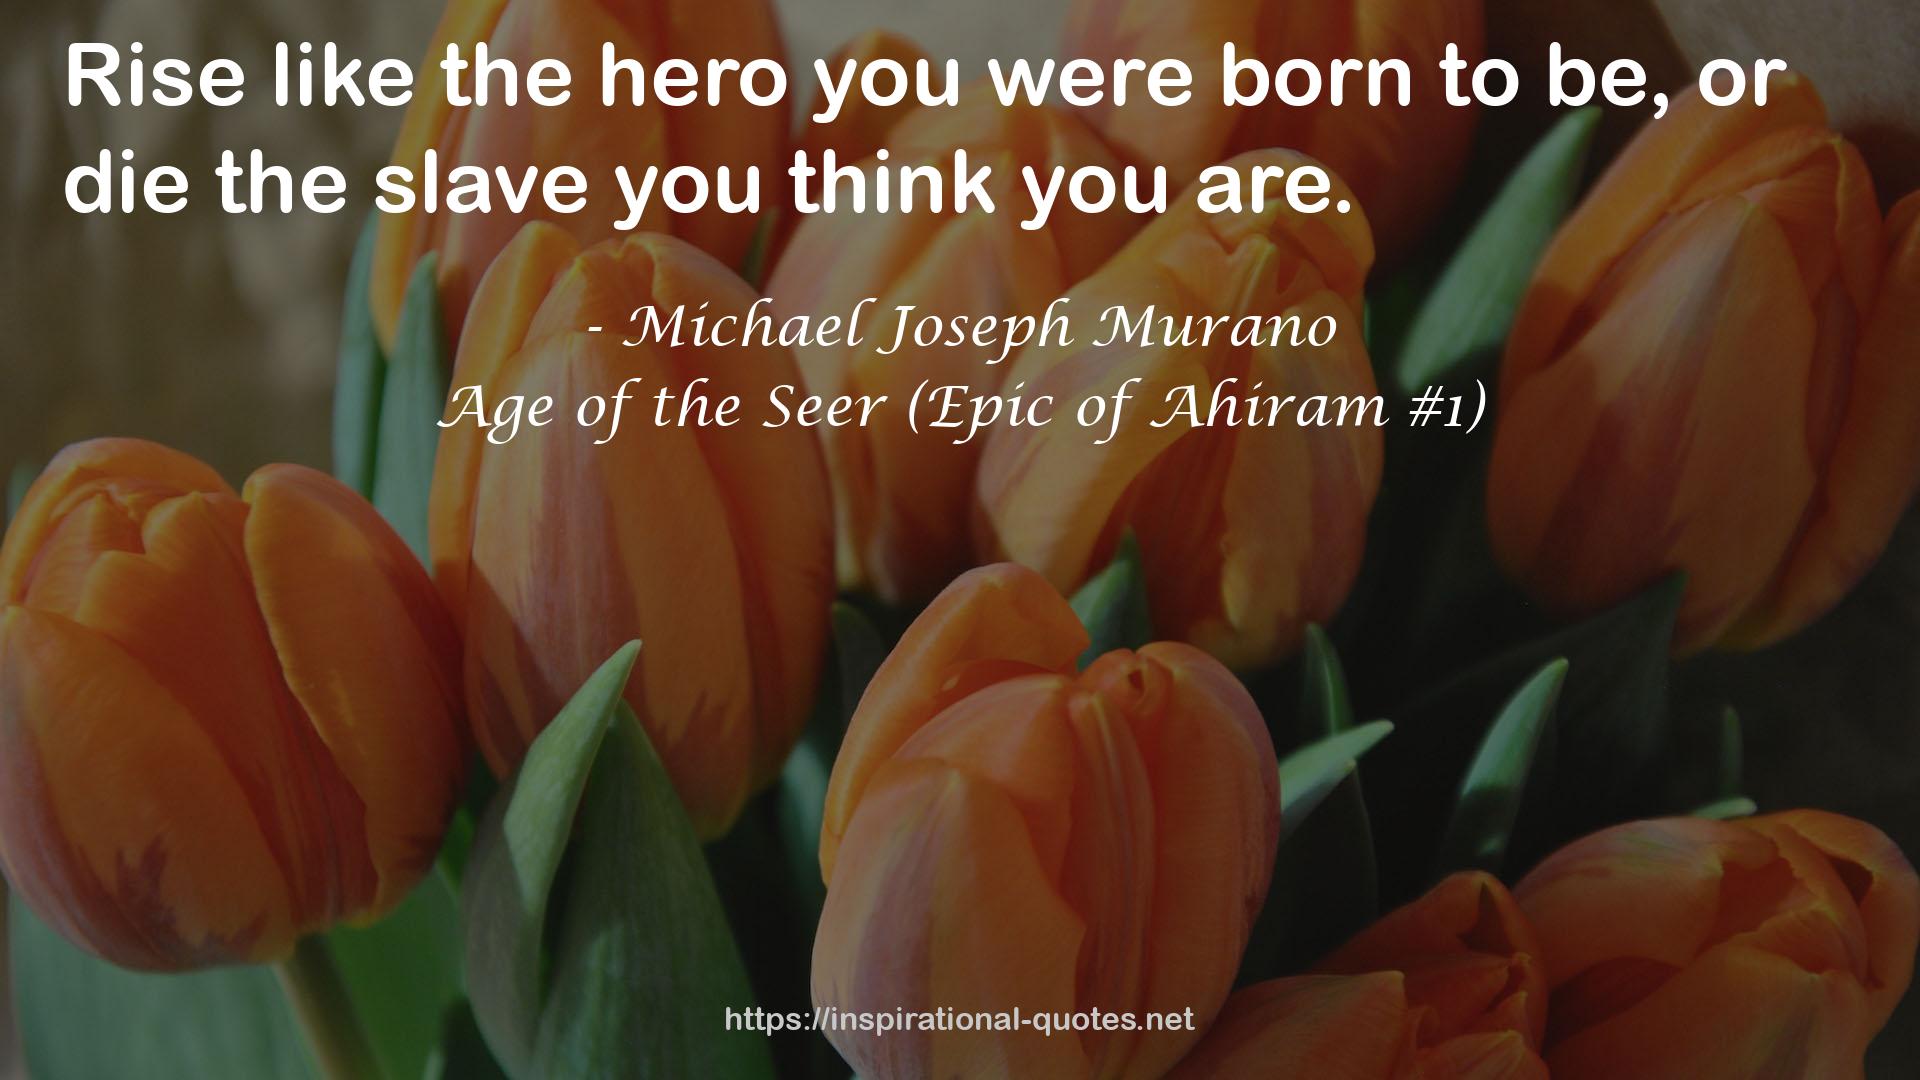 Age of the Seer (Epic of Ahiram #1) QUOTES